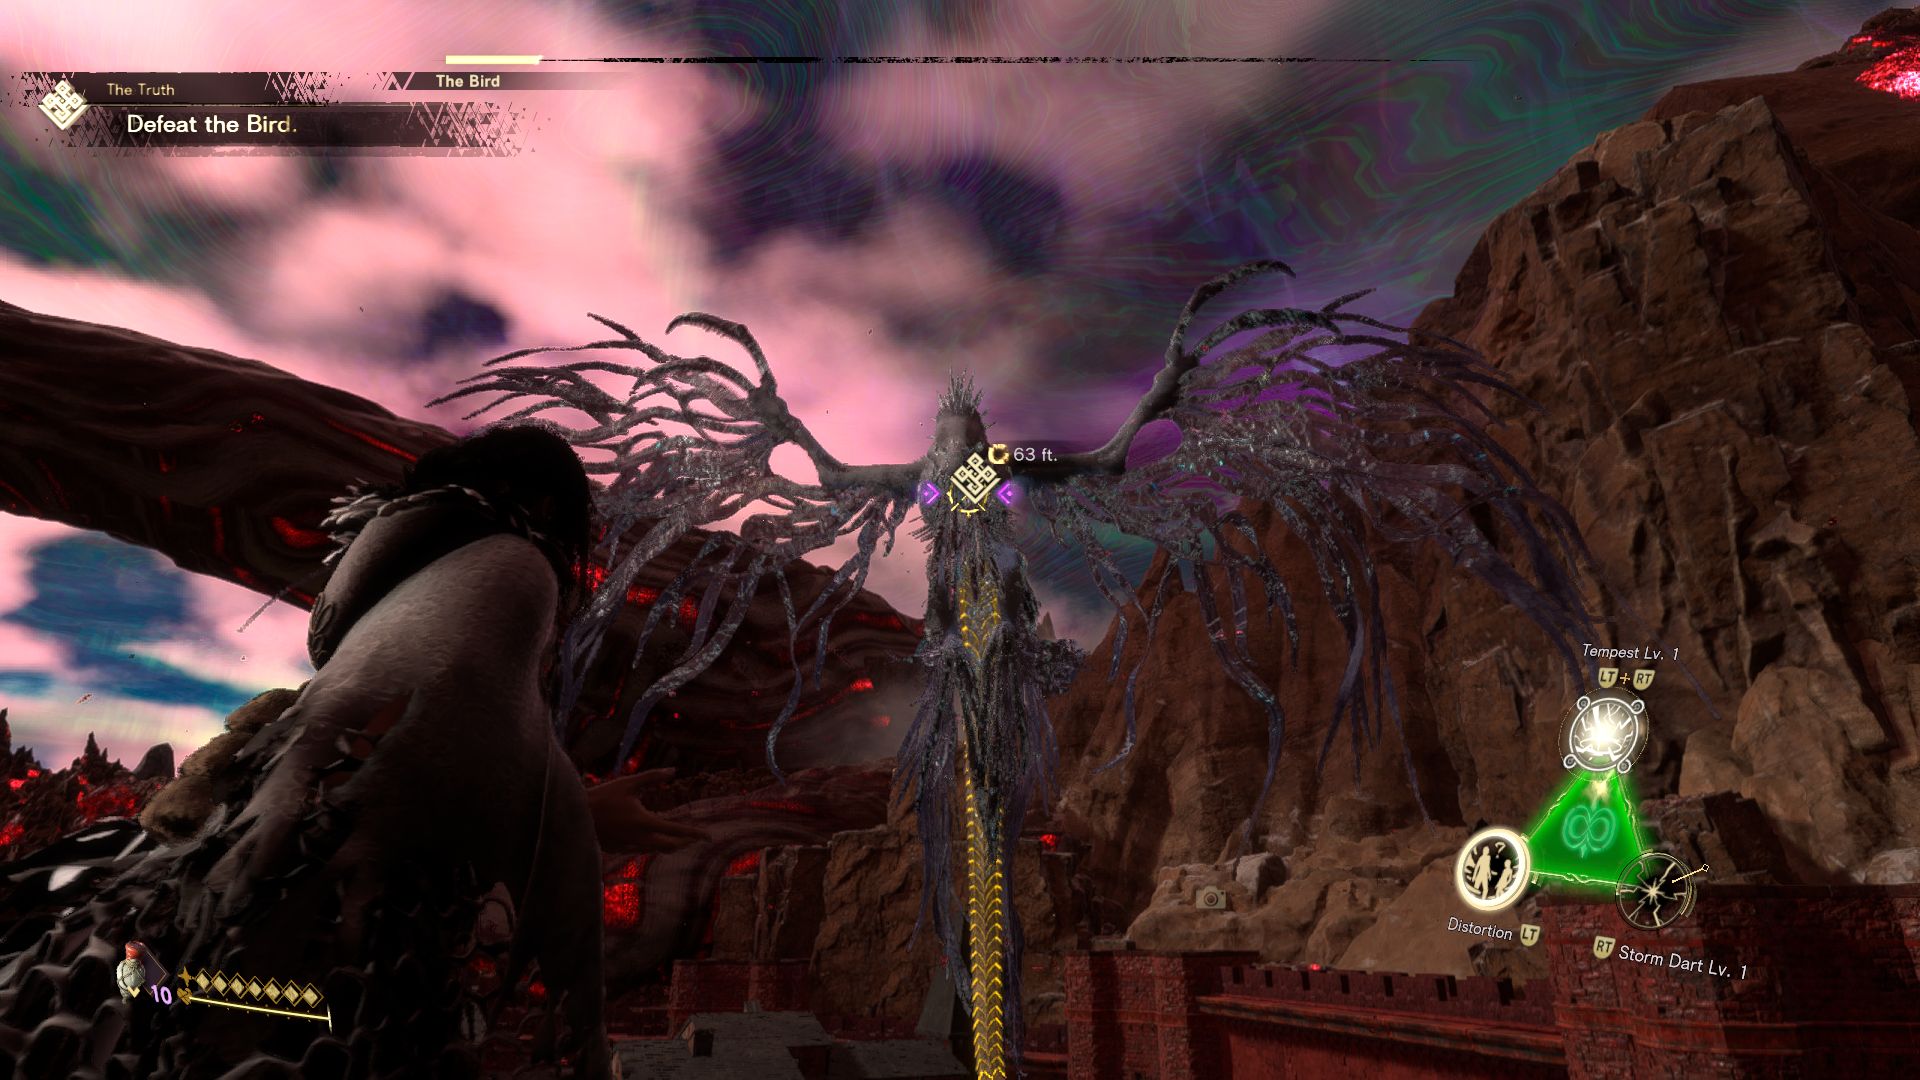 Frey is observing a mini-boss enemy in forspoken, a giant wyvern with ragged wings